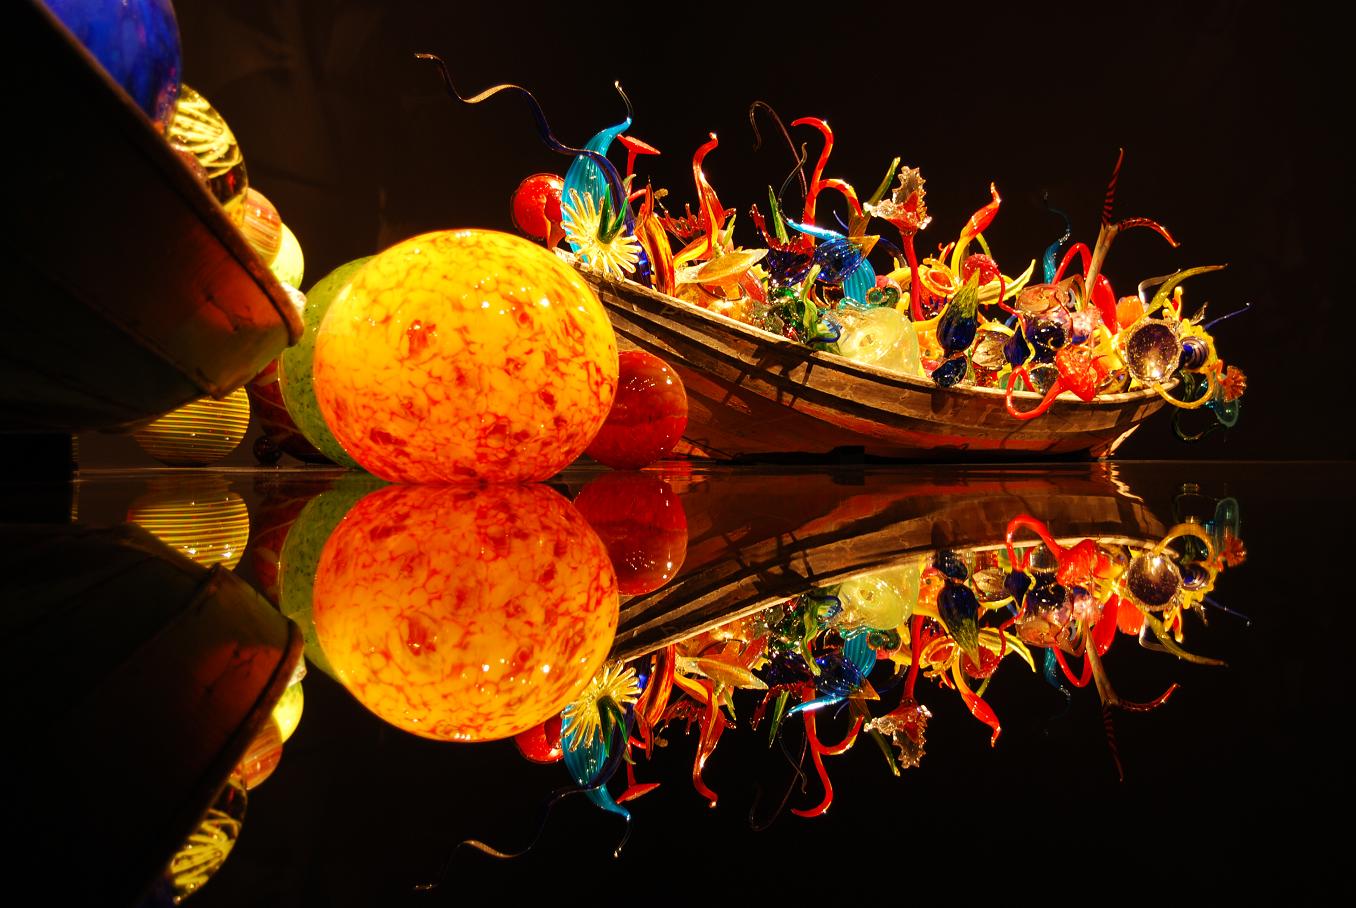 The Art of Dale Chihuly